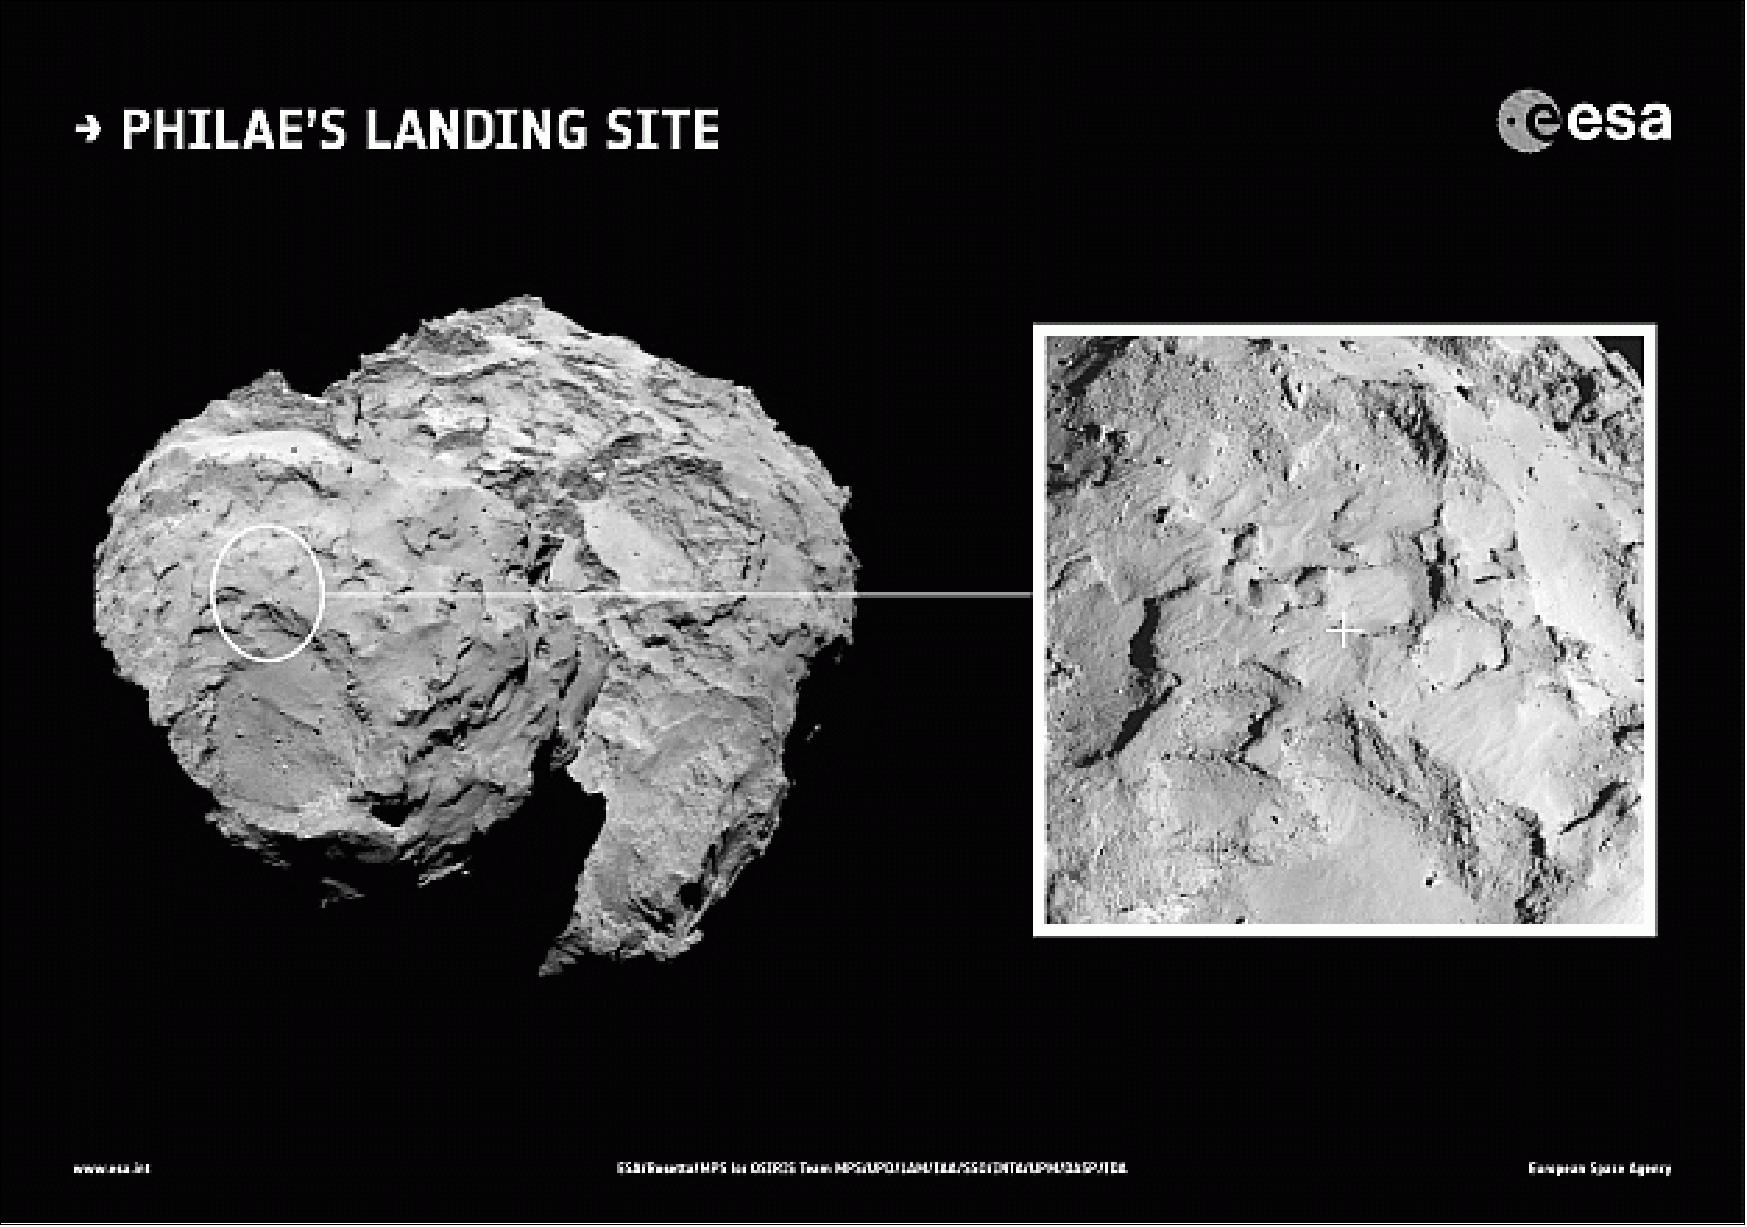 Figure 170: Site J is located on the head of Comet 67P/Churyumov–Gerasimenko. An inset showing a close up of the landing site is also shown (image credit: ESA, Rosetta, MPS for OSIRIS Team MPS, UPD, LAM, IAA SSO, INTA, UPM, DASP, IDA)